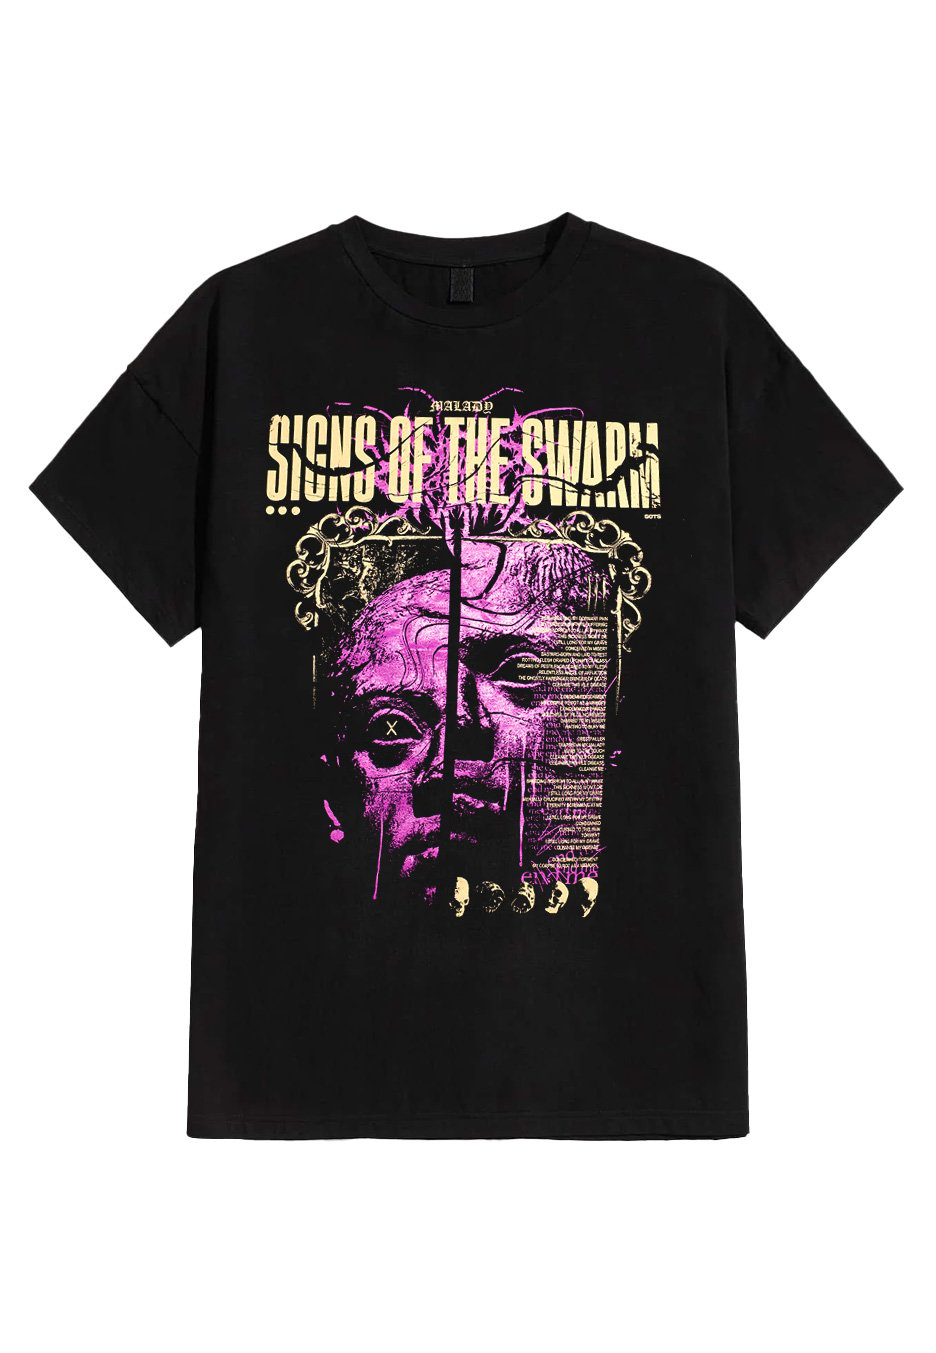 Signs Of The Swarm - Malady - T-Shirt